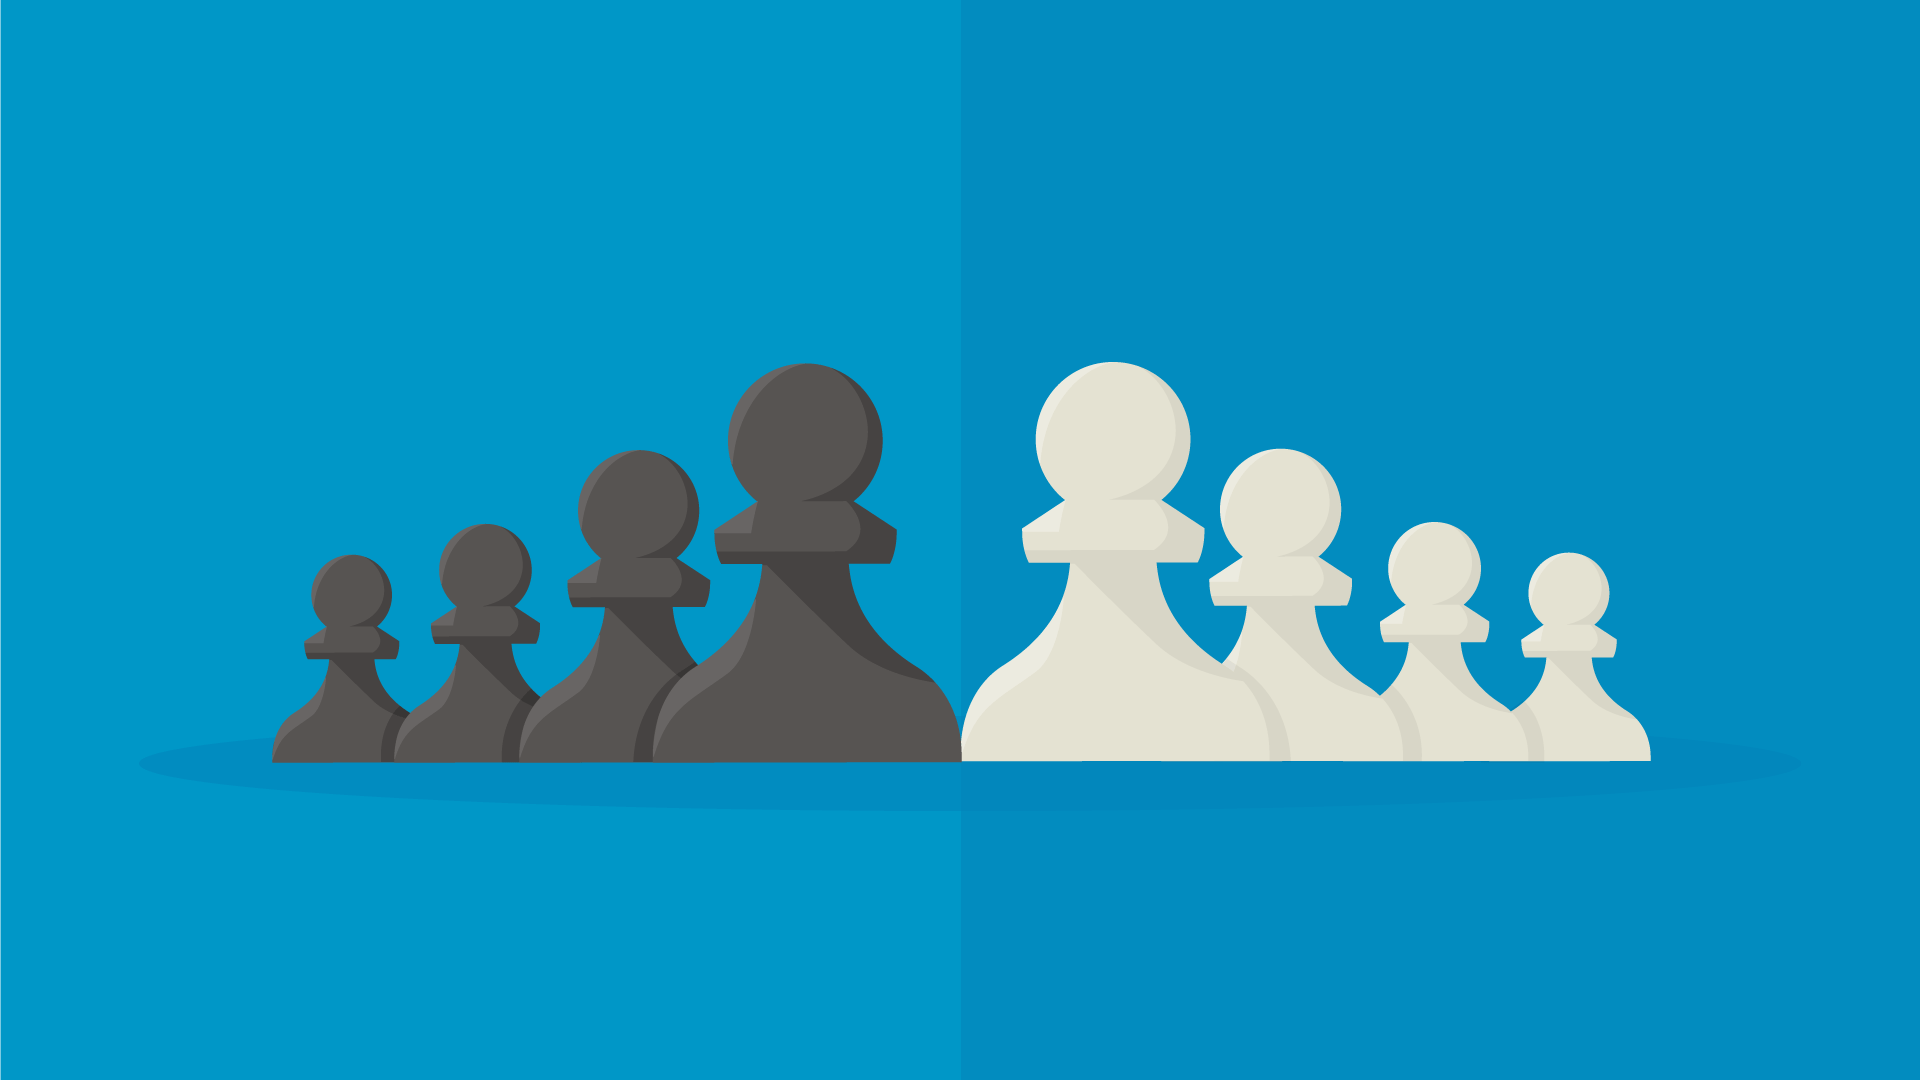 Chess Strategy- Open vs Closed Games 